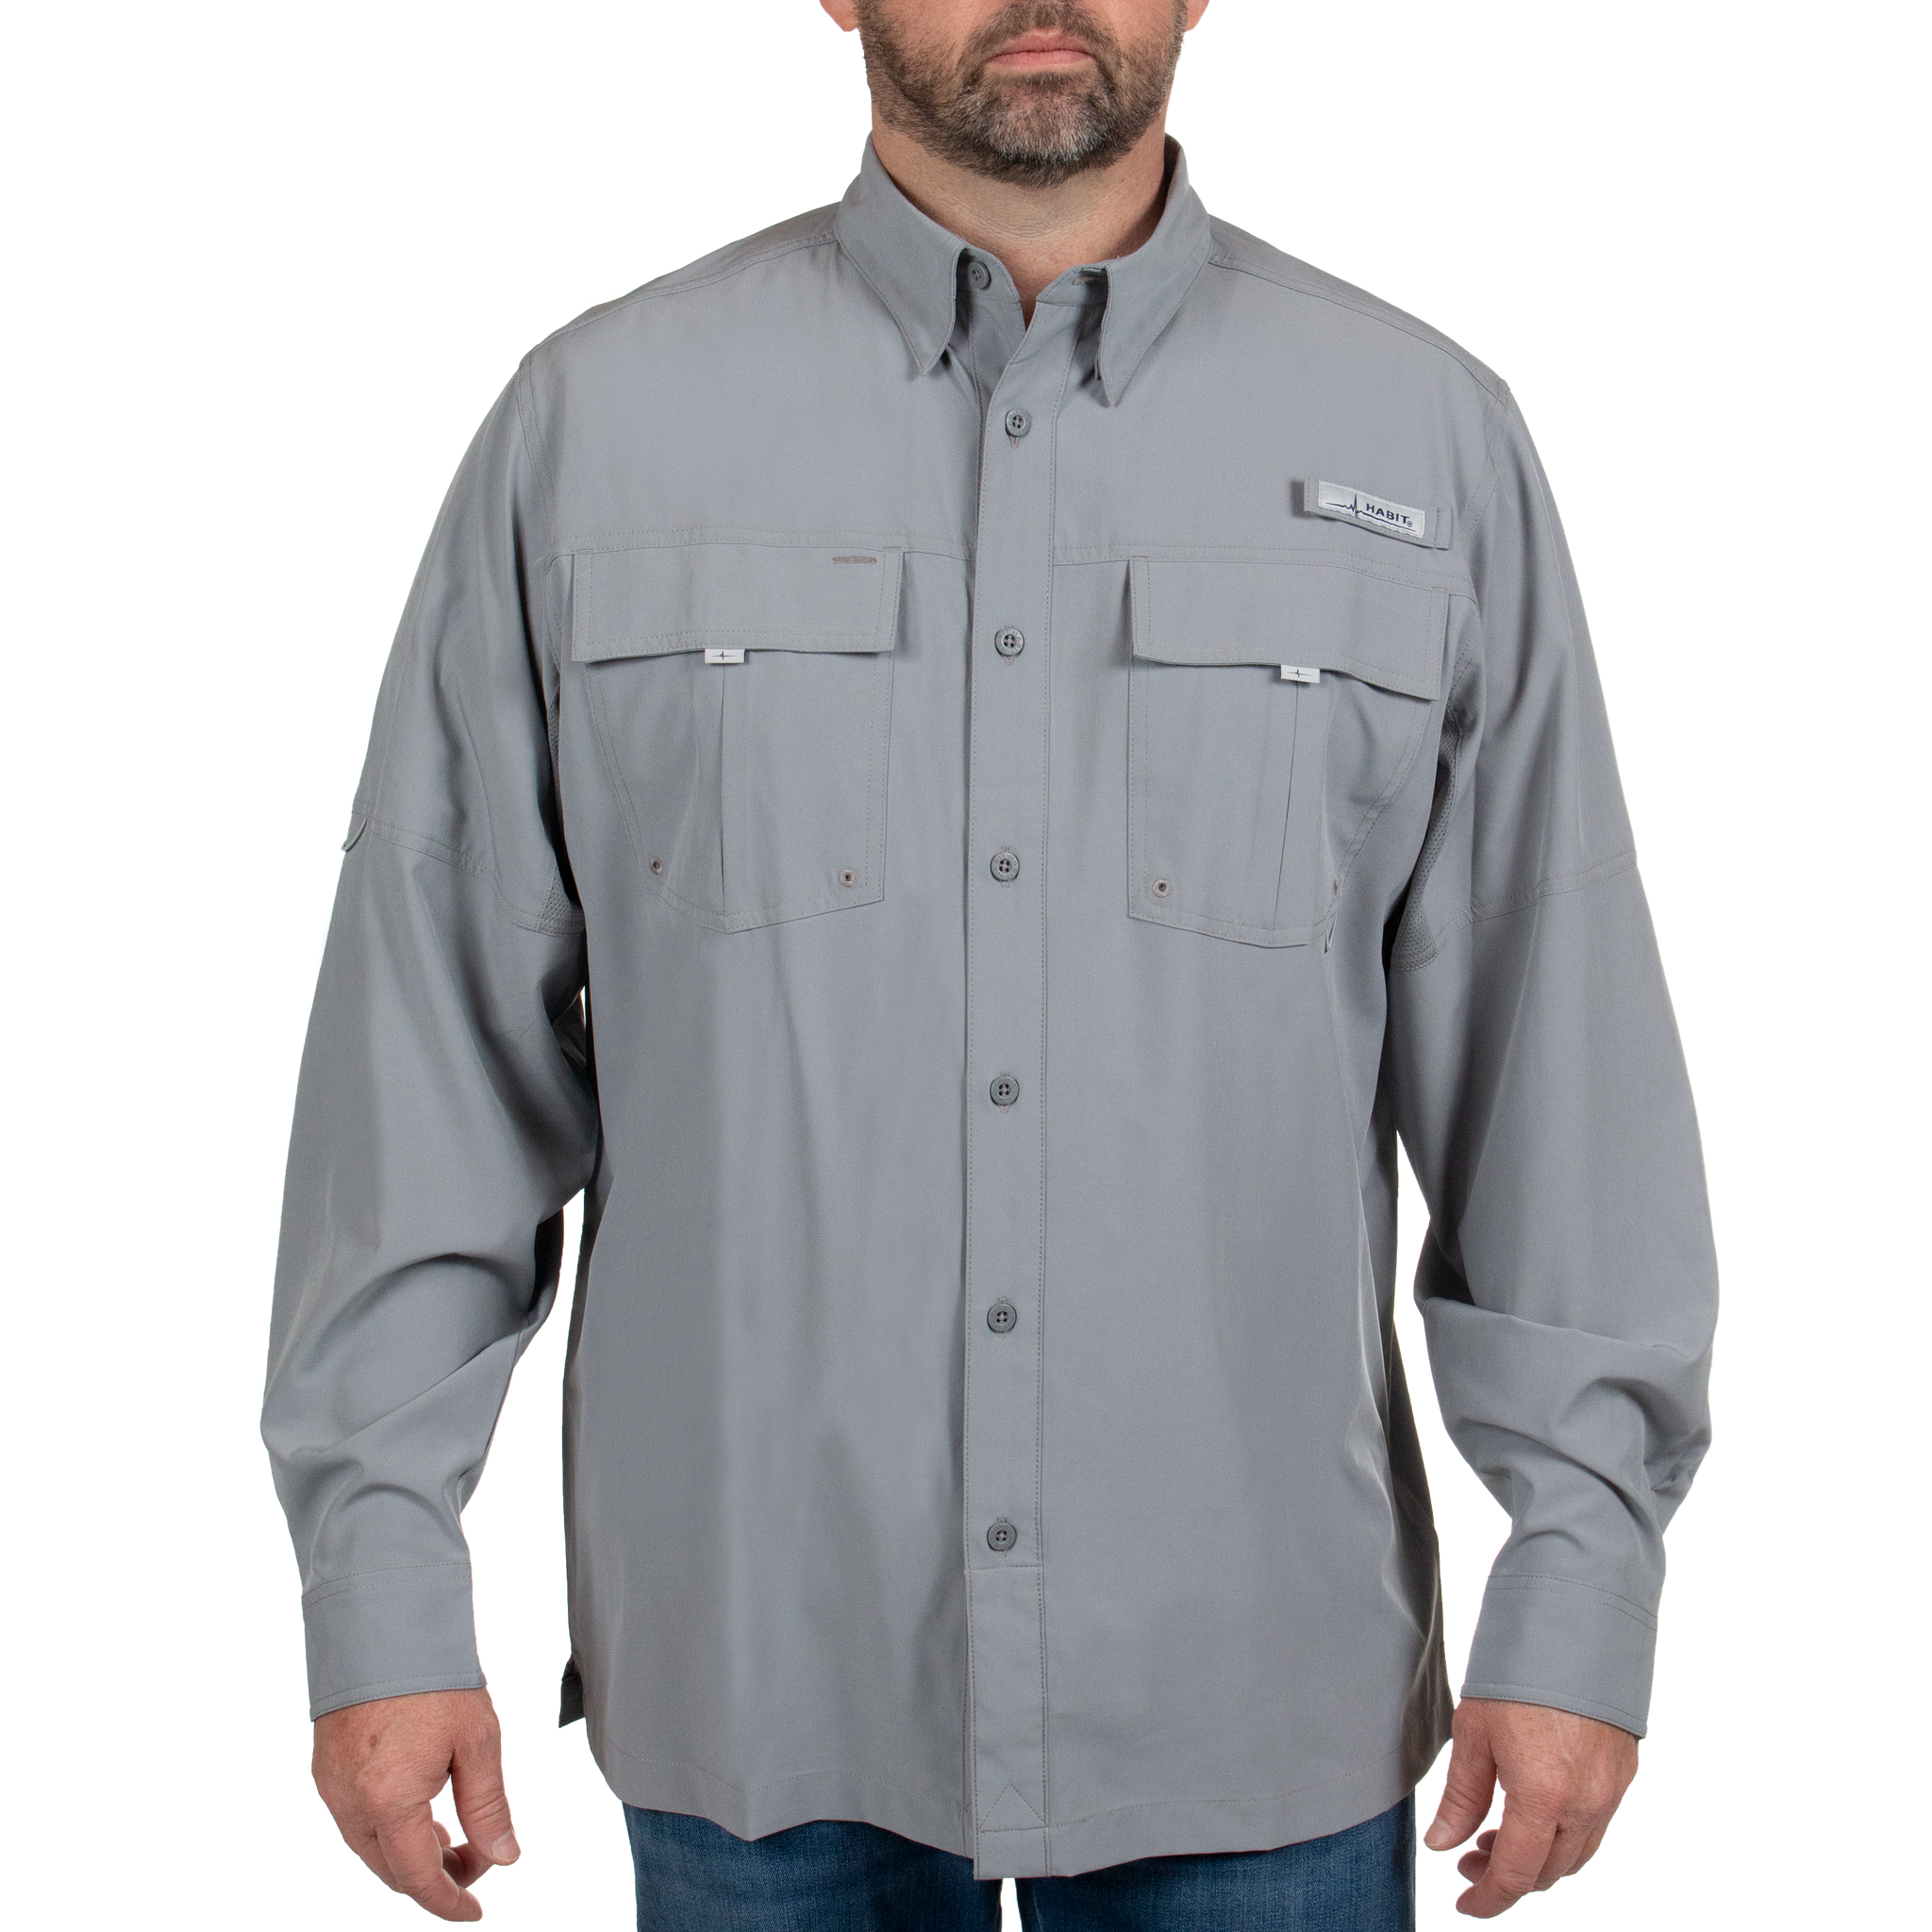 Men’s Forage River Long Sleeve River Guide Fishing Shirt Monument Front